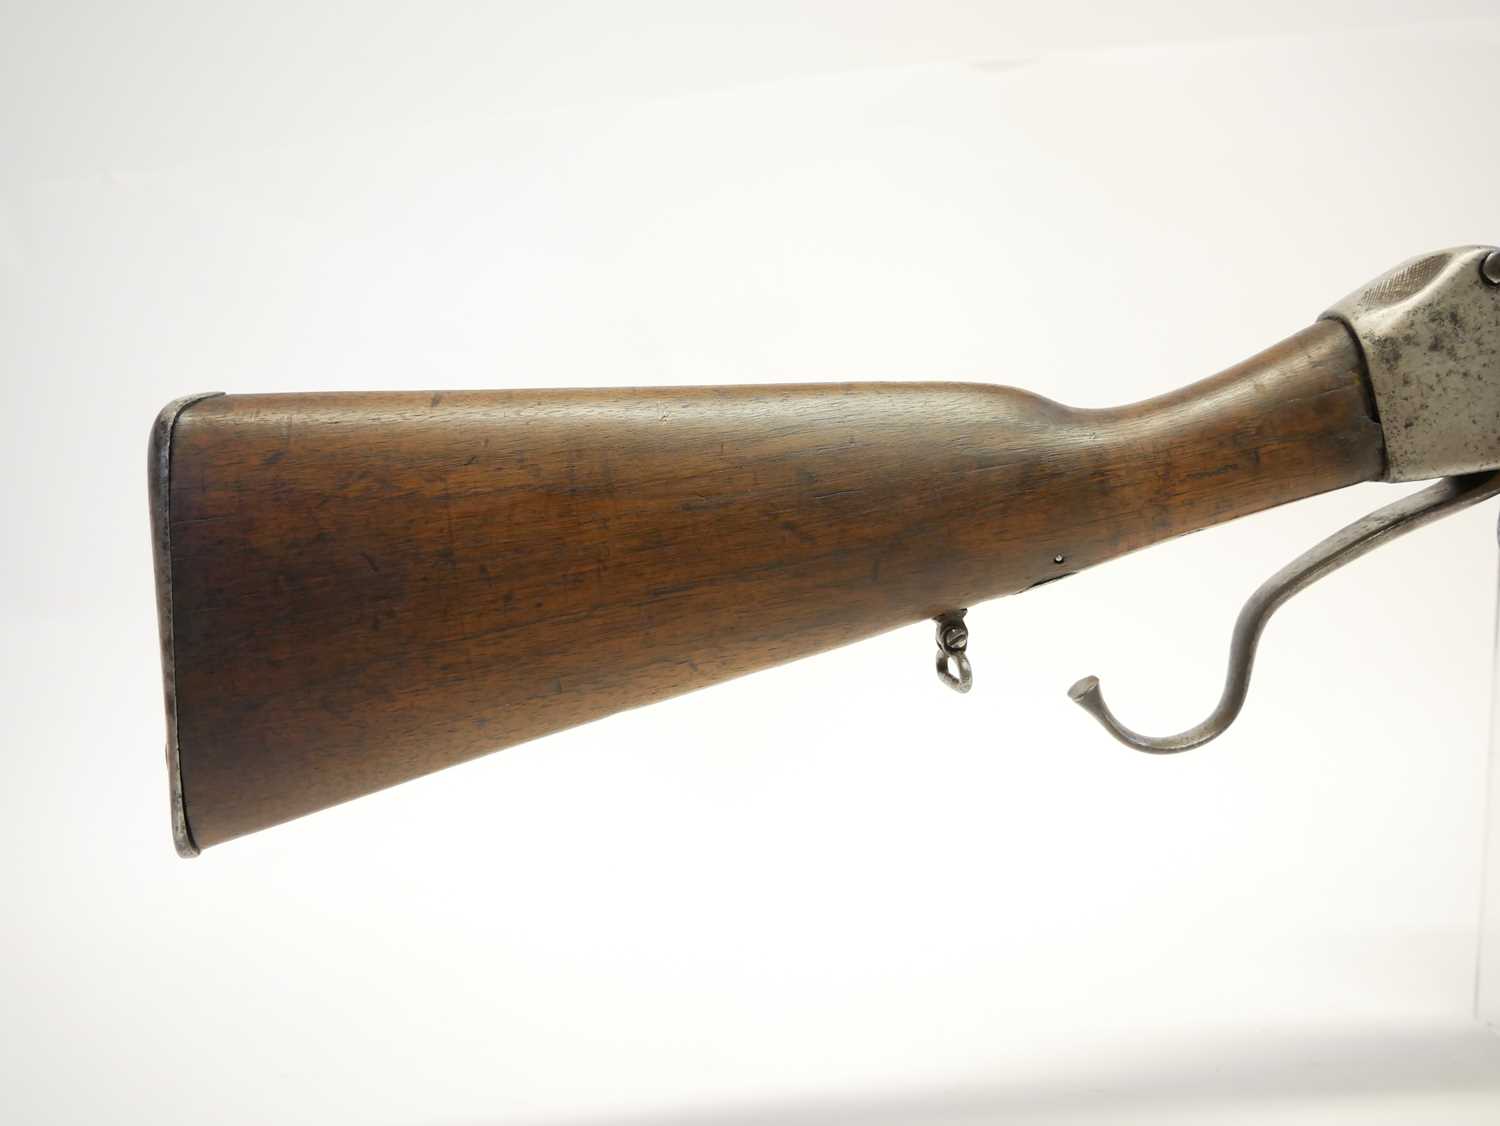 Sporterised Martini Henry .577/450 rifle, probably of Belgian origin reworked in India, 27inch - Image 3 of 13